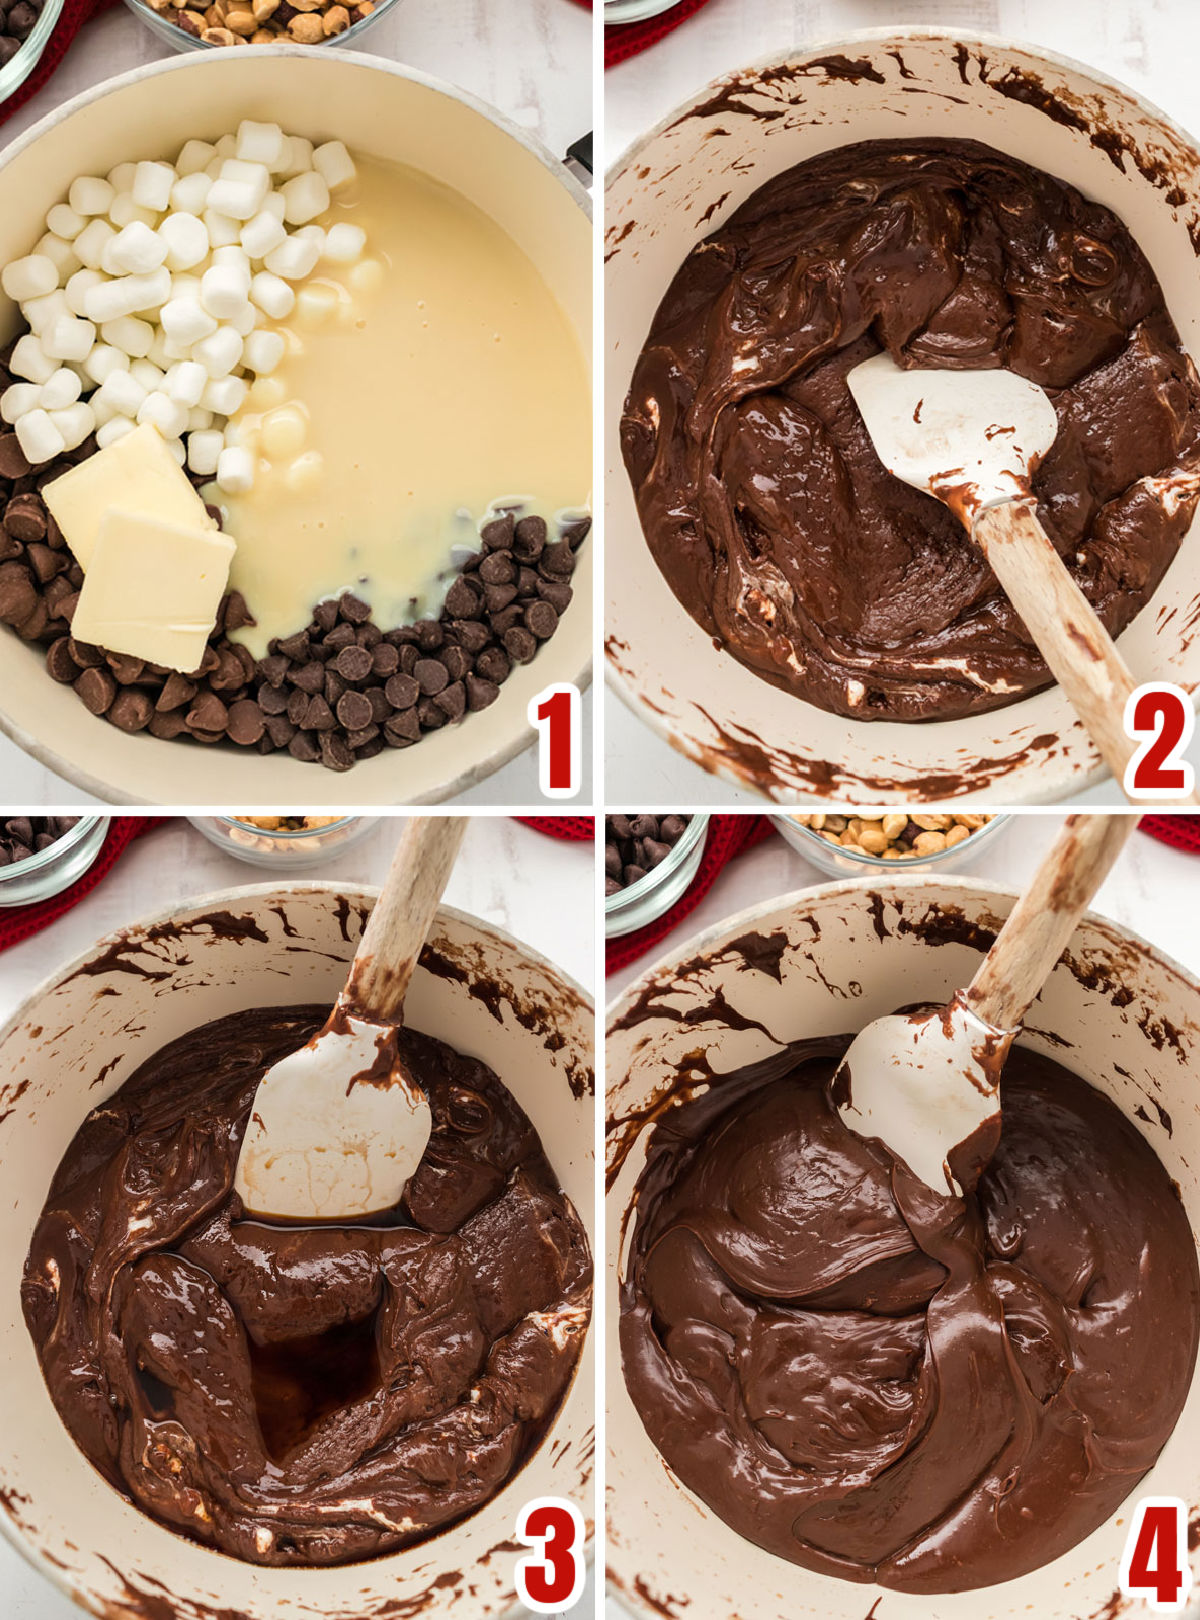 Collage image showing the steps for making the chocolate fudge mixture that acts as the base for the Rocky Road Fudge.